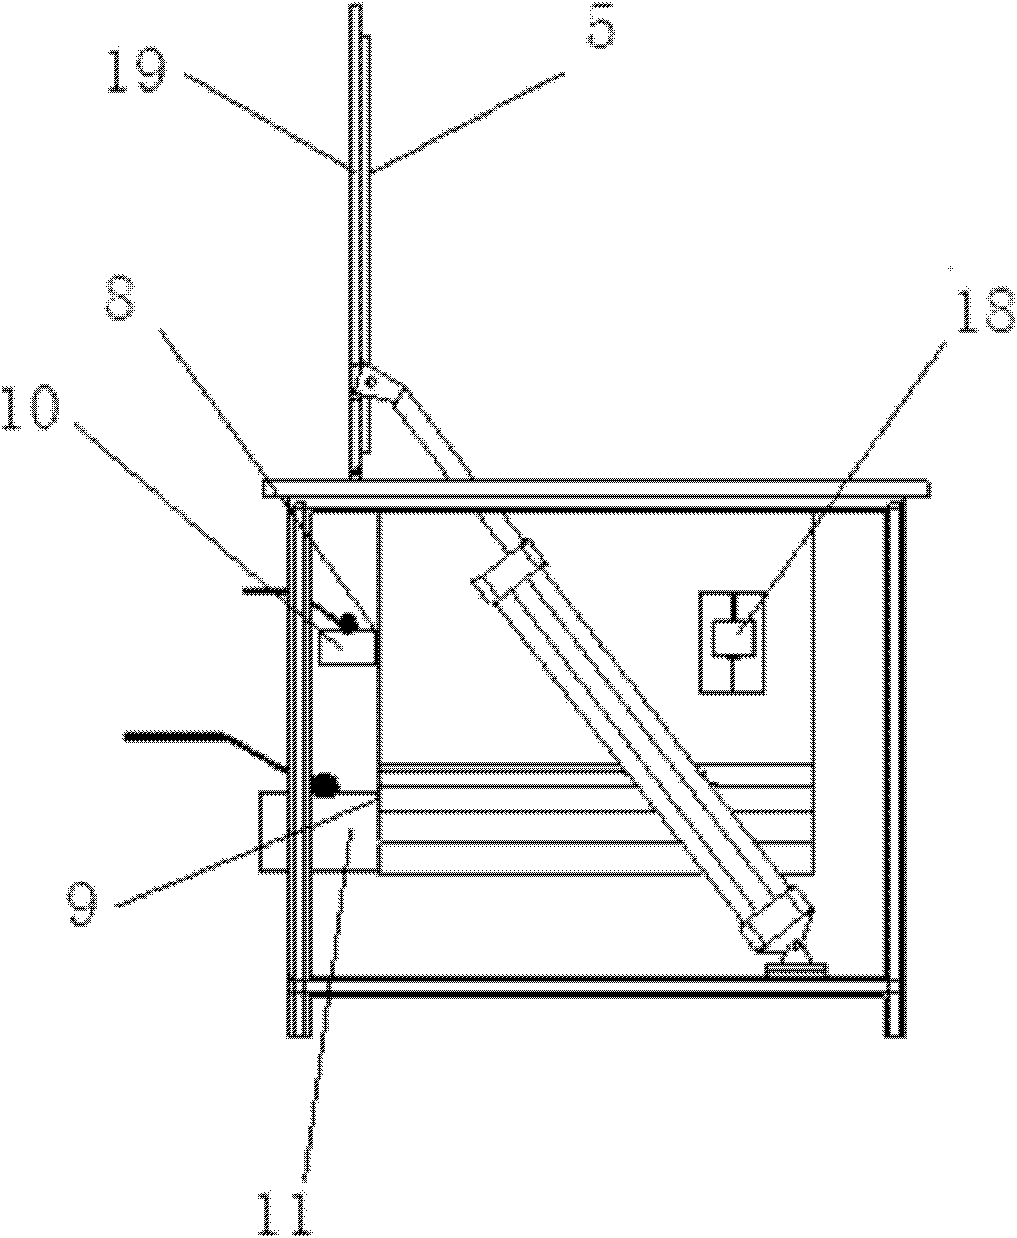 A glass plate hot water degumming device